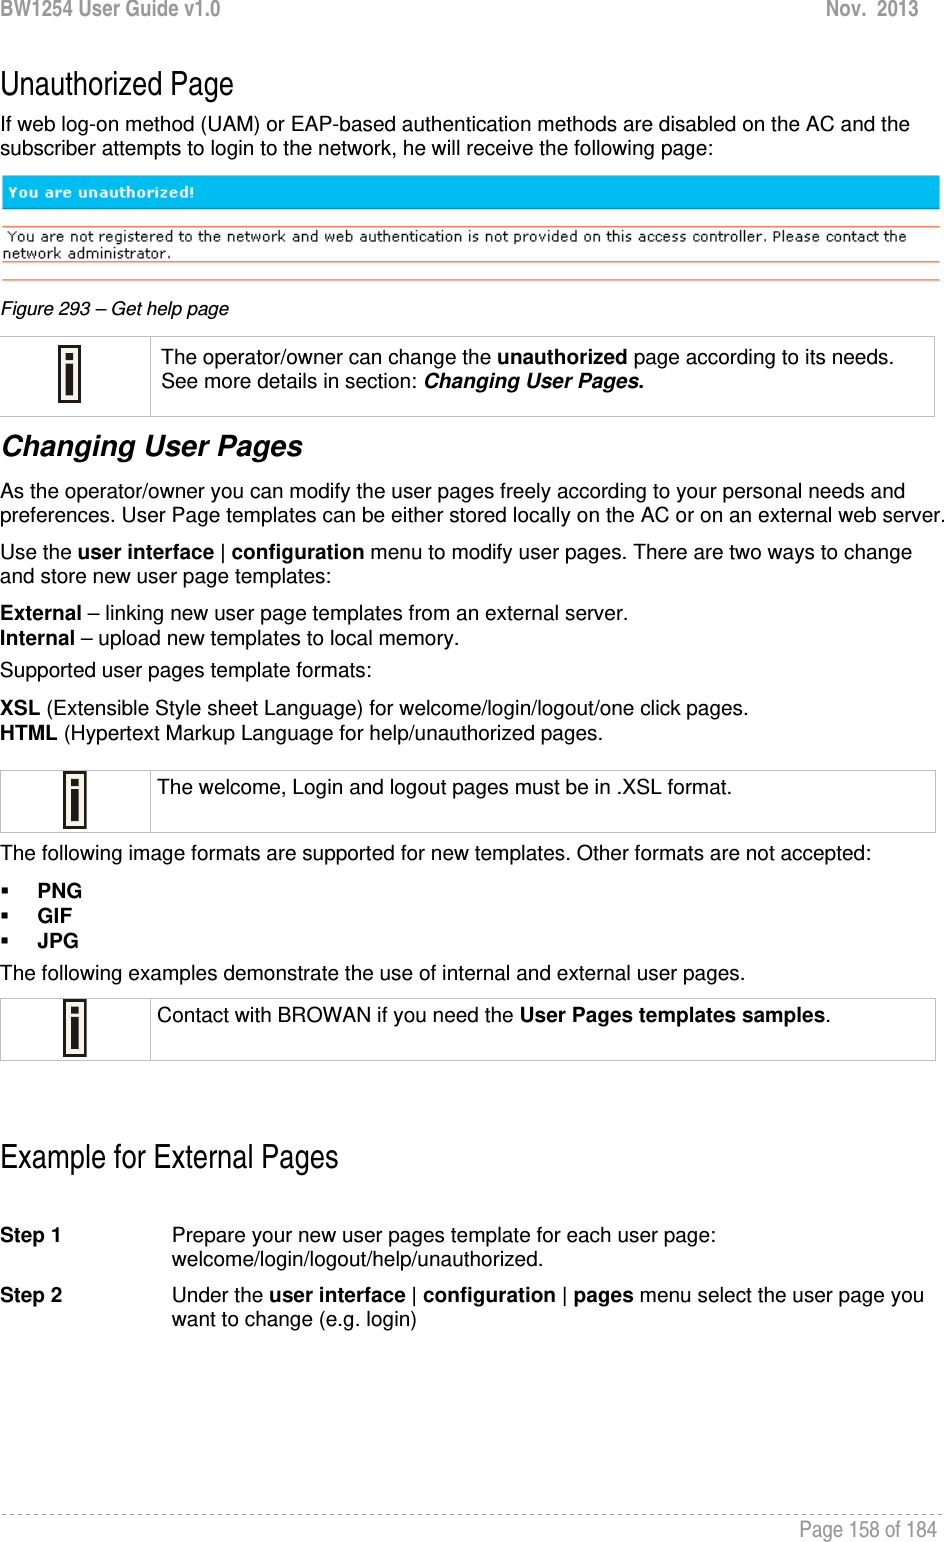 BW1254 User Guide v1.0  Nov.  2013     Page 158 of 184   Unauthorized Page If web log-on method (UAM) or EAP-based authentication methods are disabled on the AC and the subscriber attempts to login to the network, he will receive the following page:   Figure 293 – Get help page  The operator/owner can change the unauthorized page according to its needs. See more details in section: Changing User Pages. Changing User Pages As the operator/owner you can modify the user pages freely according to your personal needs and preferences. User Page templates can be either stored locally on the AC or on an external web server.  Use the user interface | configuration menu to modify user pages. There are two ways to change and store new user page templates: External – linking new user page templates from an external server. Internal – upload new templates to local memory. Supported user pages template formats: XSL (Extensible Style sheet Language) for welcome/login/logout/one click pages. HTML (Hypertext Markup Language for help/unauthorized pages.   The welcome, Login and logout pages must be in .XSL format. The following image formats are supported for new templates. Other formats are not accepted:  PNG  GIF  JPG  The following examples demonstrate the use of internal and external user pages.  Contact with BROWAN if you need the User Pages templates samples.   Example for External Pages  Step 1  Prepare your new user pages template for each user page: welcome/login/logout/help/unauthorized.  Step 2  Under the user interface | configuration | pages menu select the user page you want to change (e.g. login) 